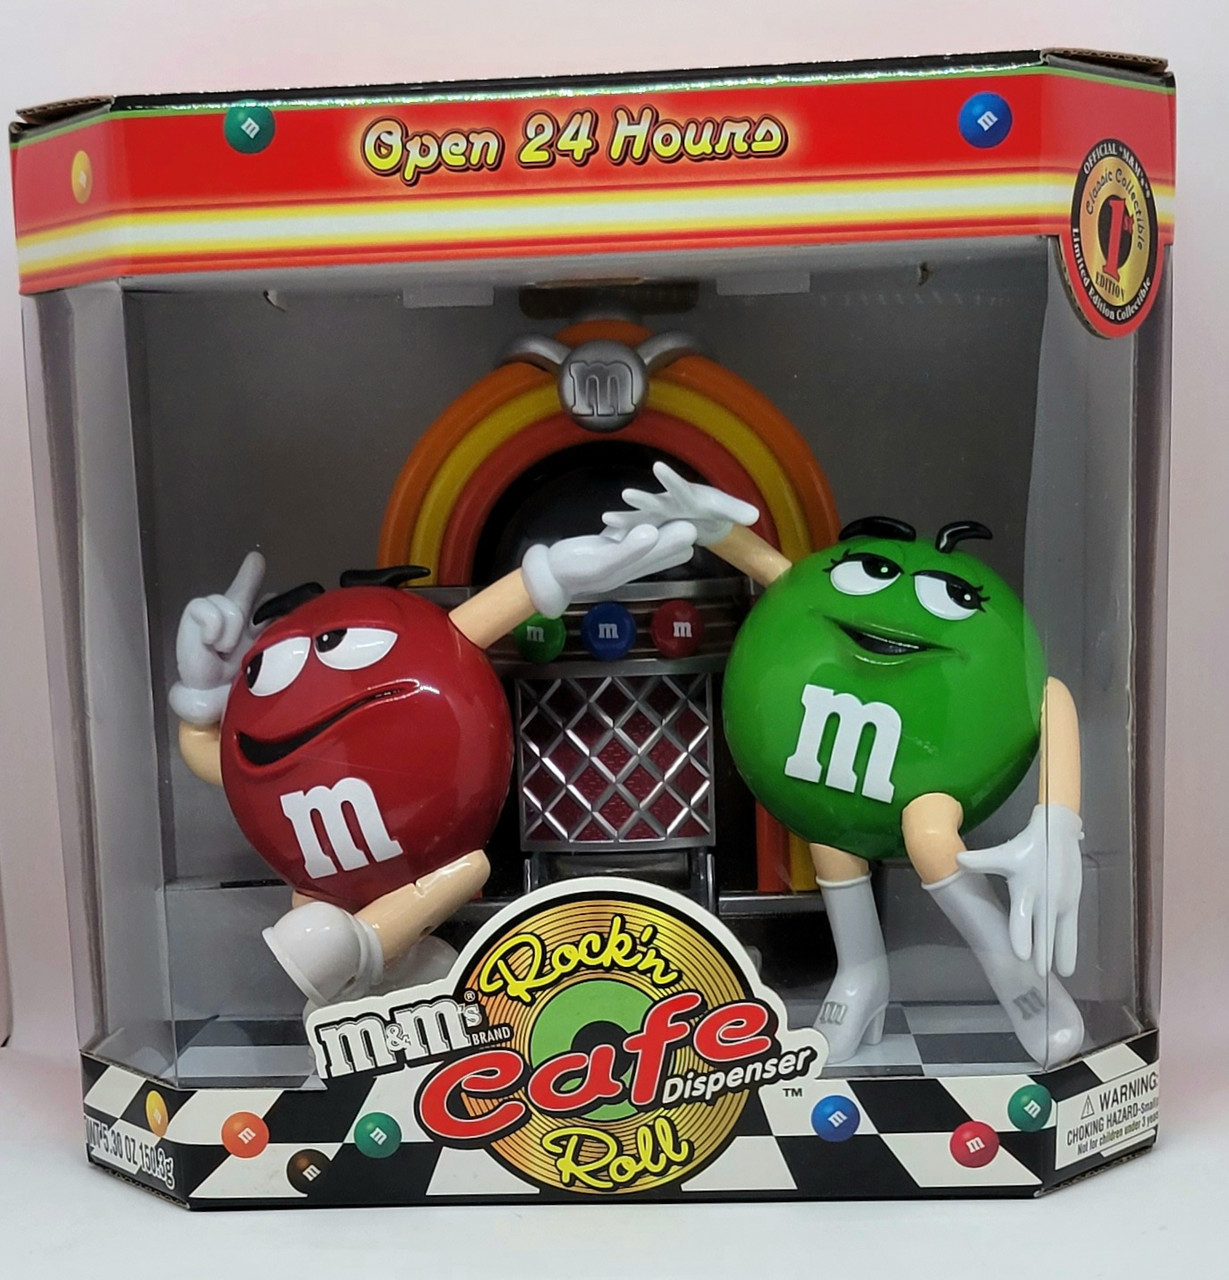 New Red M&M's Candy Character Key Ring & Dispenser - collectibles